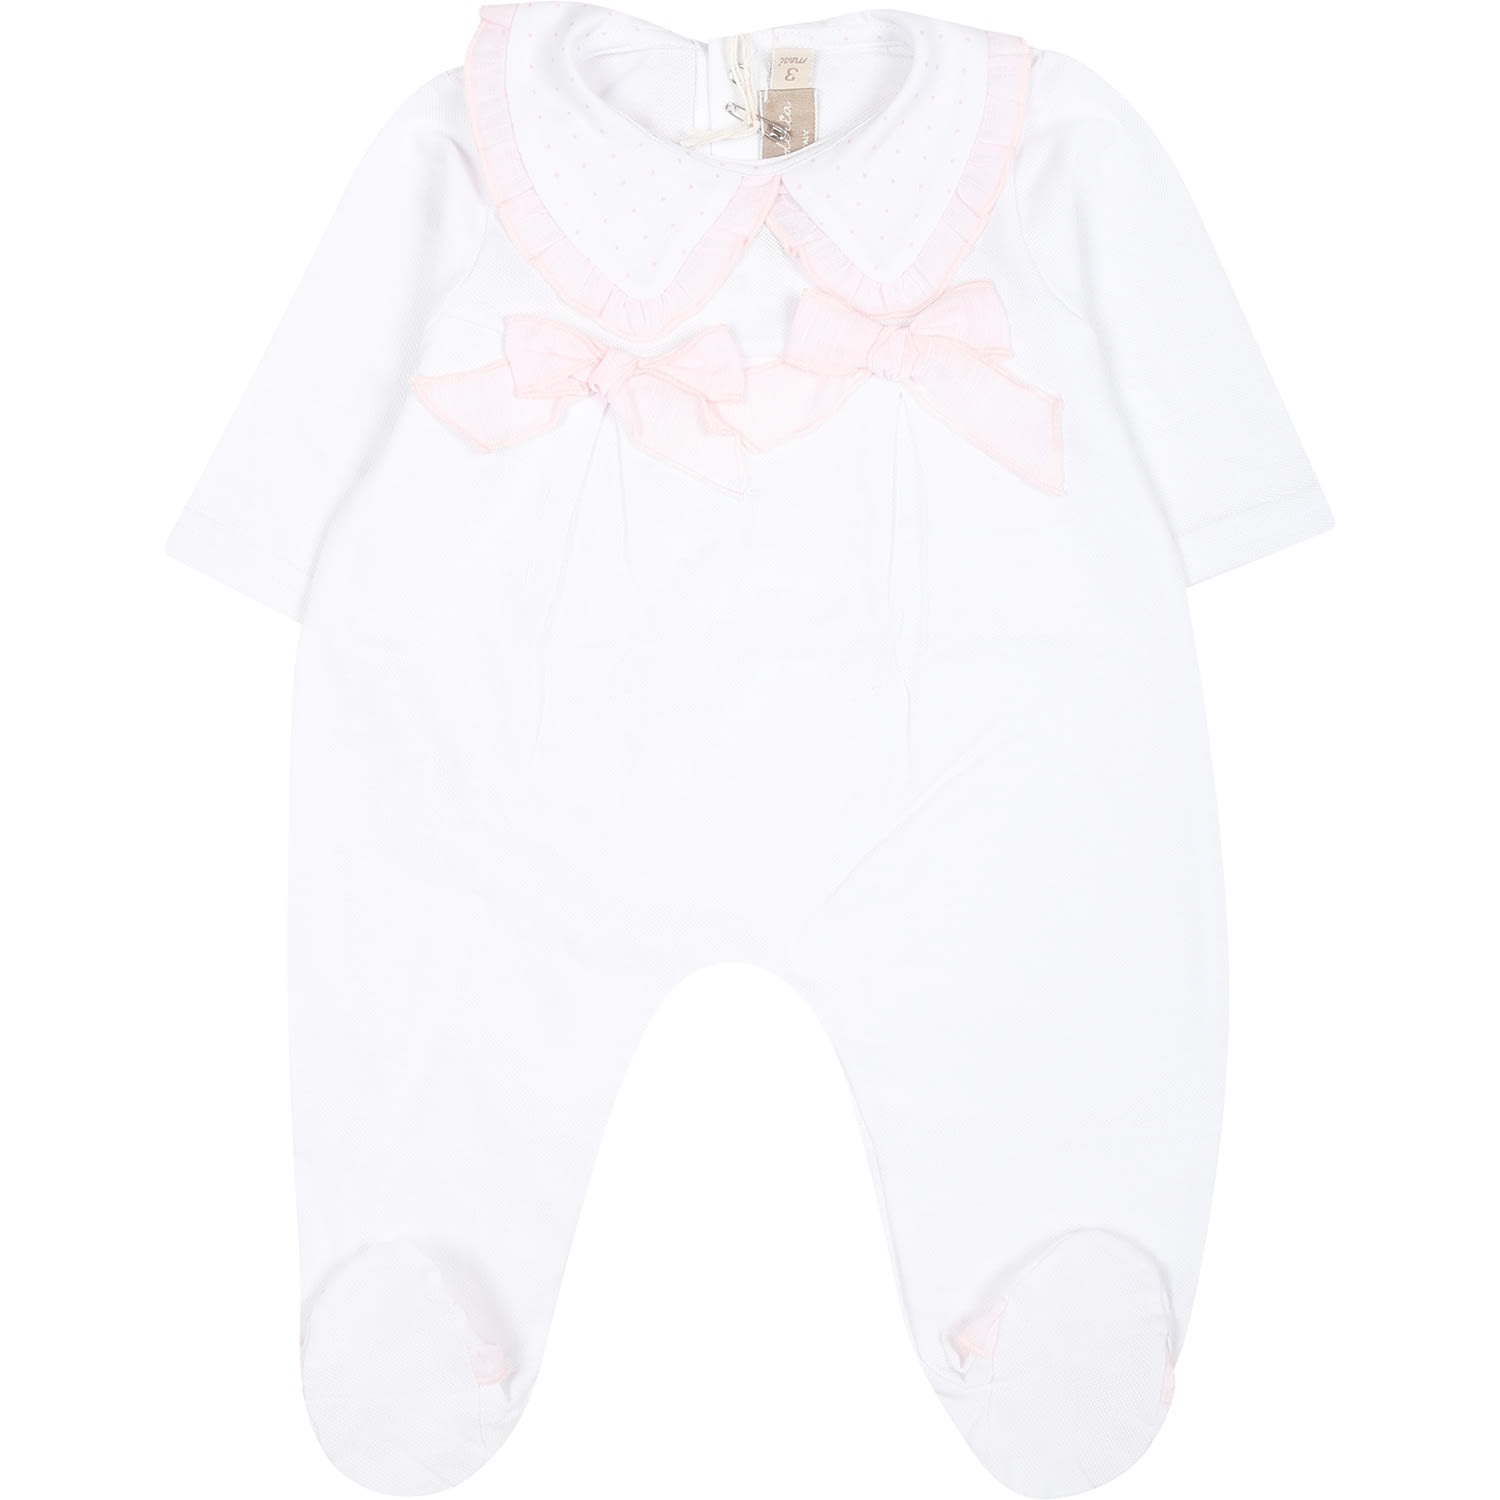 Shop La Stupenderia White Babygrow For Baby Girl With Bows